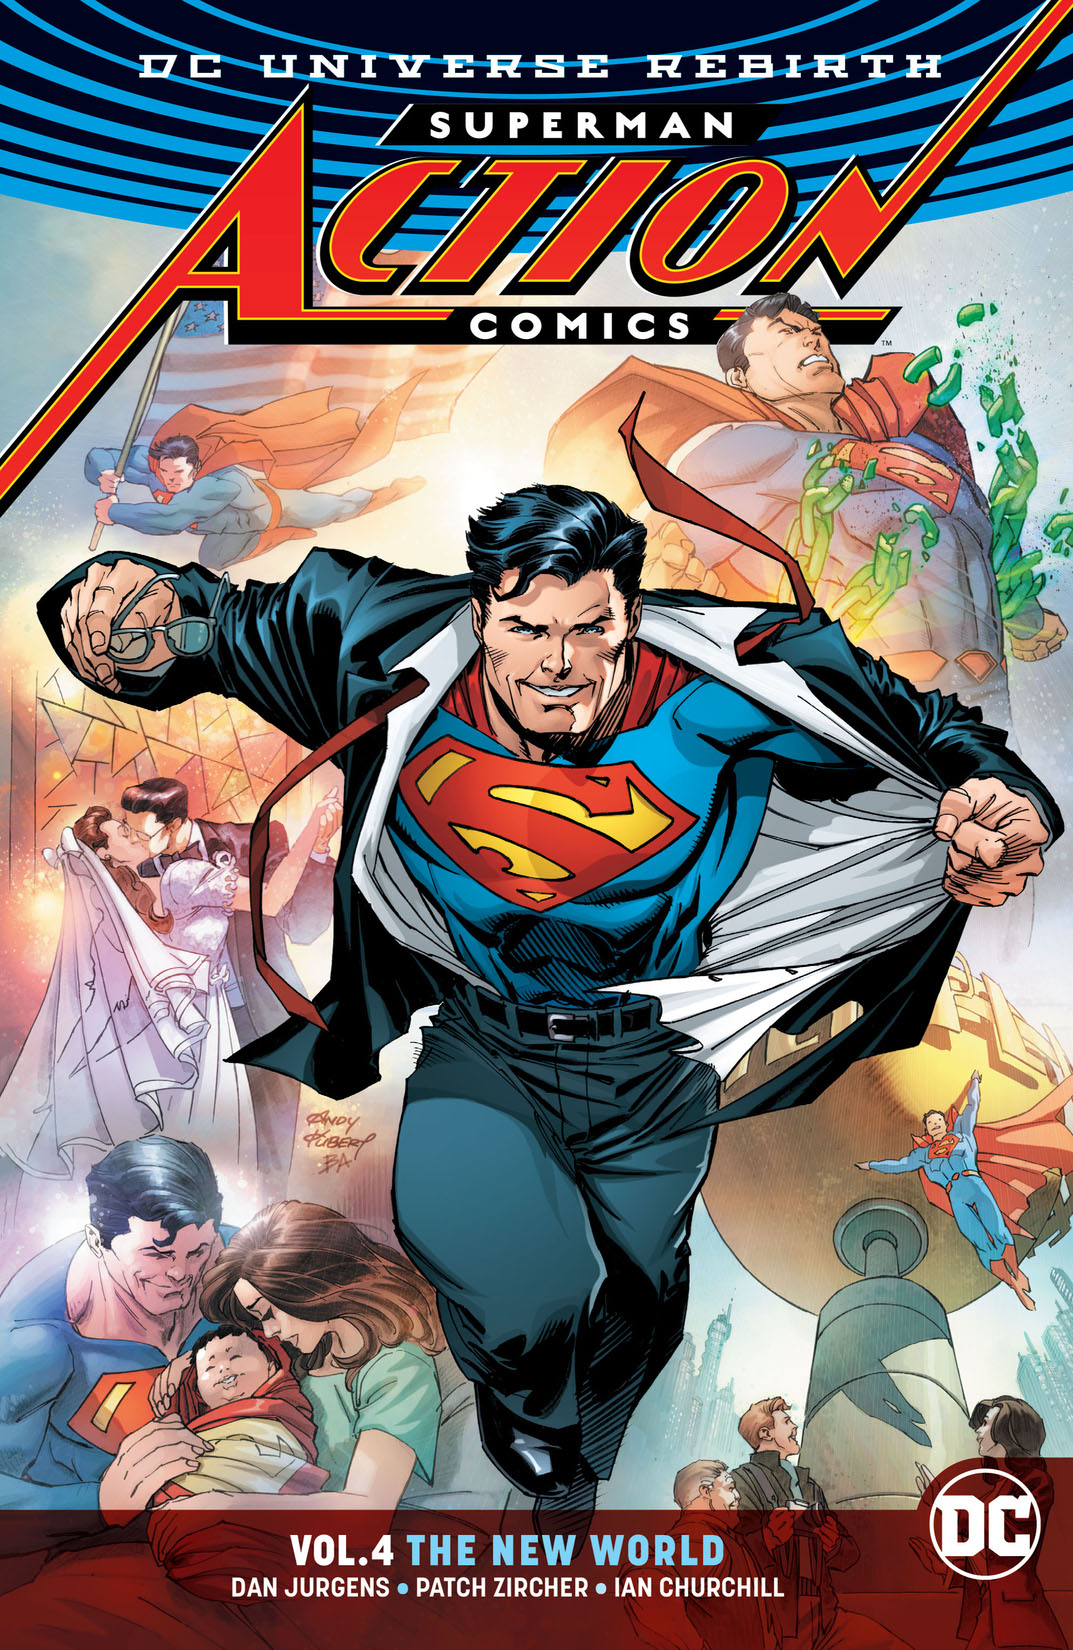 Superman - Action Comics Vol. 4: The New World preview images